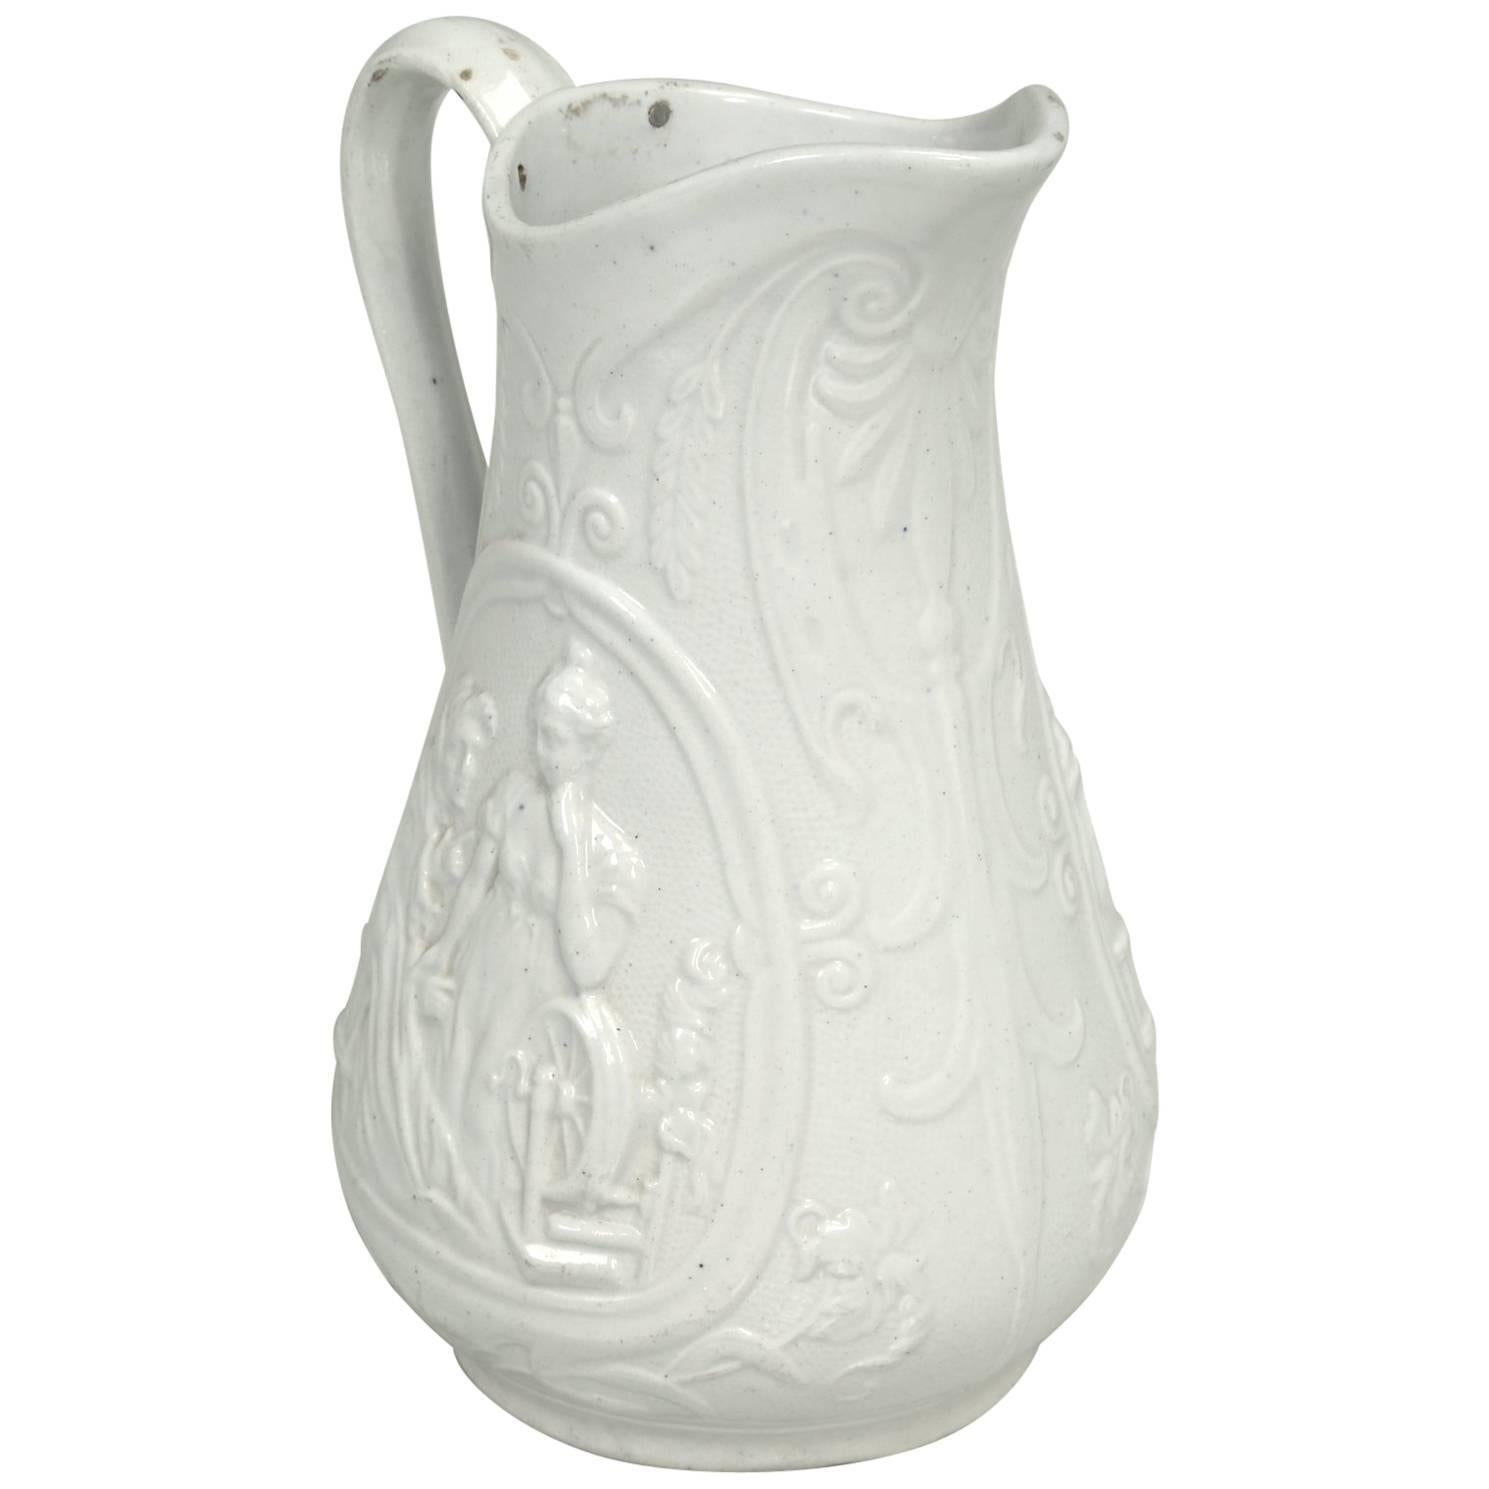 English Staffordshire Pitcher "Old Mother Hubbard"